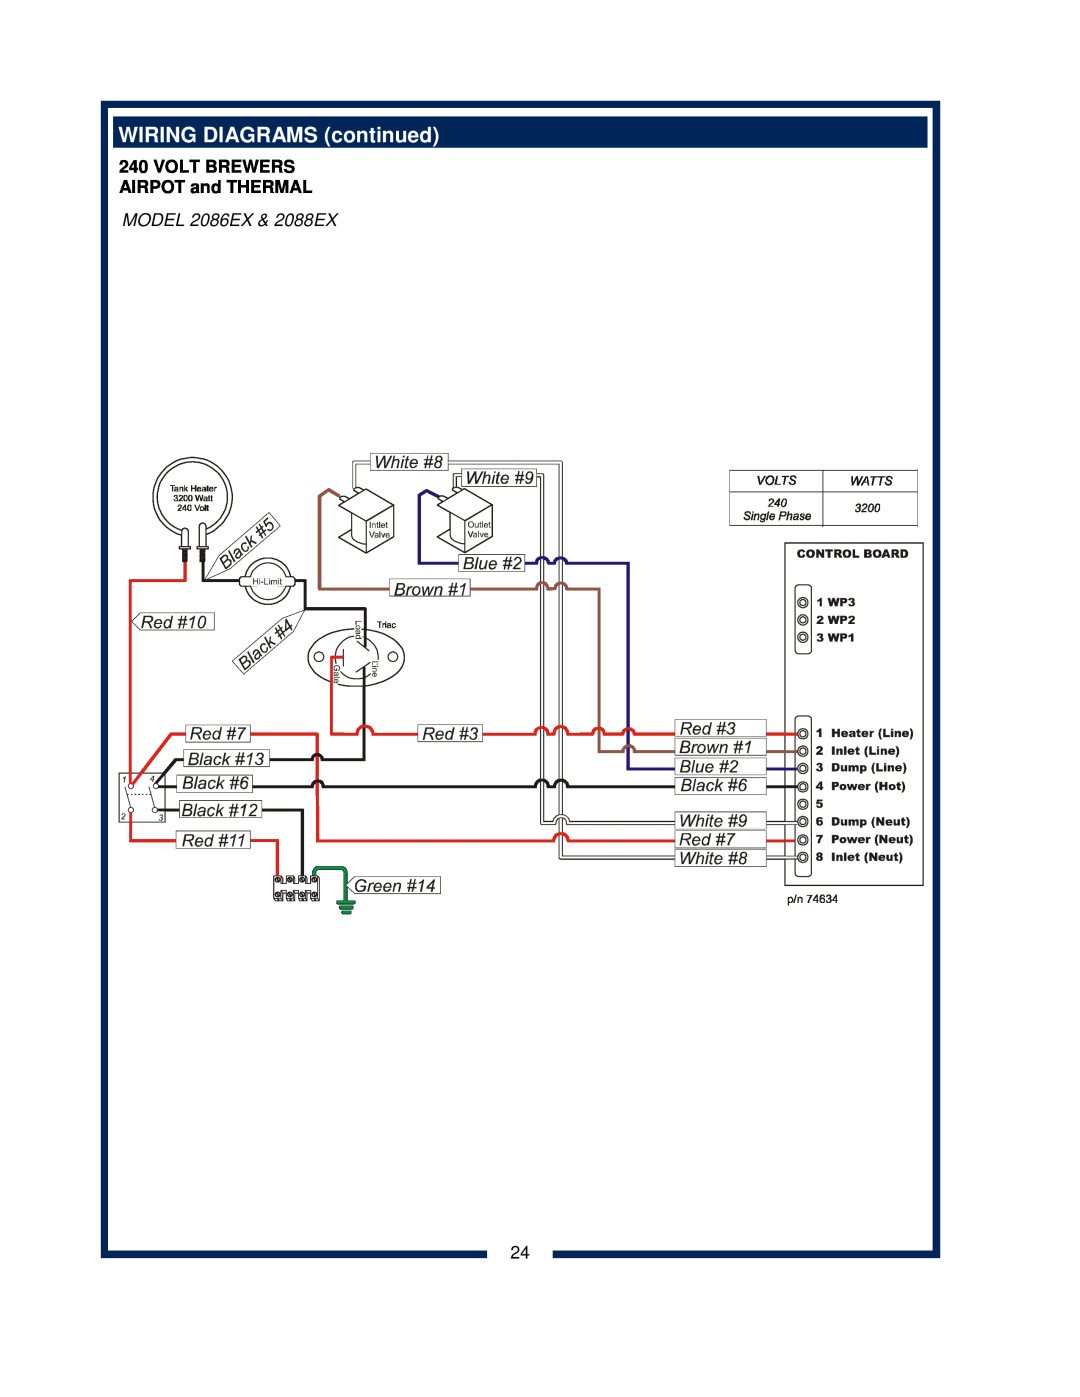 Bloomfield 2080, 2082 owner manual WIRING DIAGRAMS continued, Volt Brewers, AIRPOT and THERMAL, MODEL 2086EX & 2088EX 